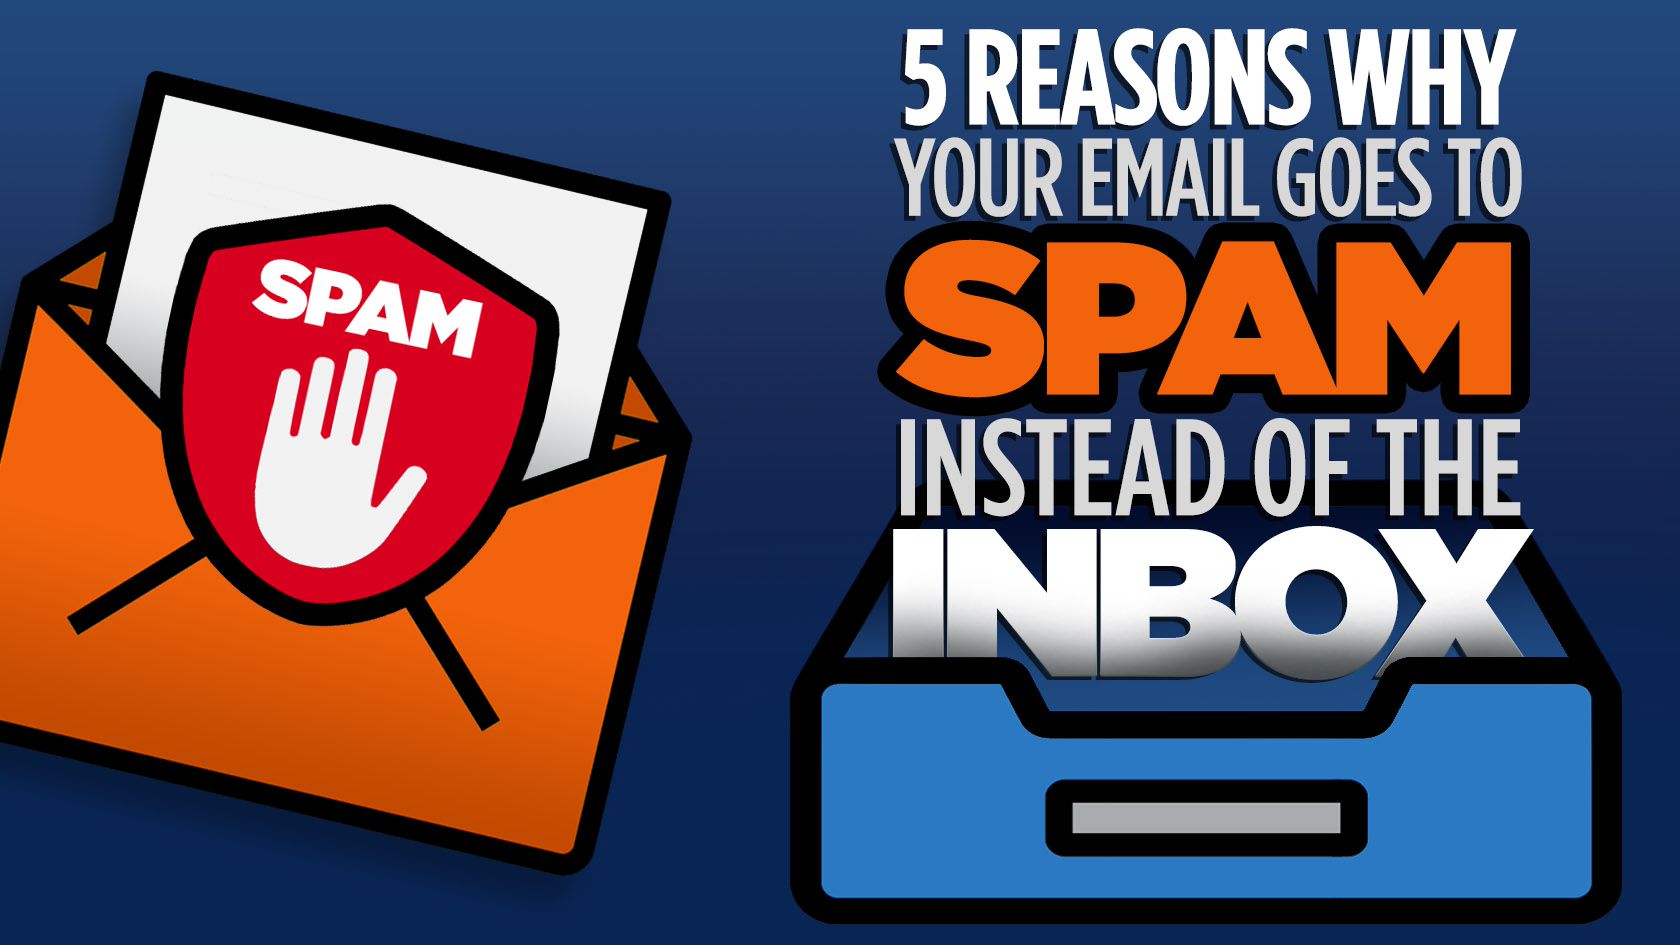 5 Reasons Why Your Email Goes to Spam Instead of the Inbox